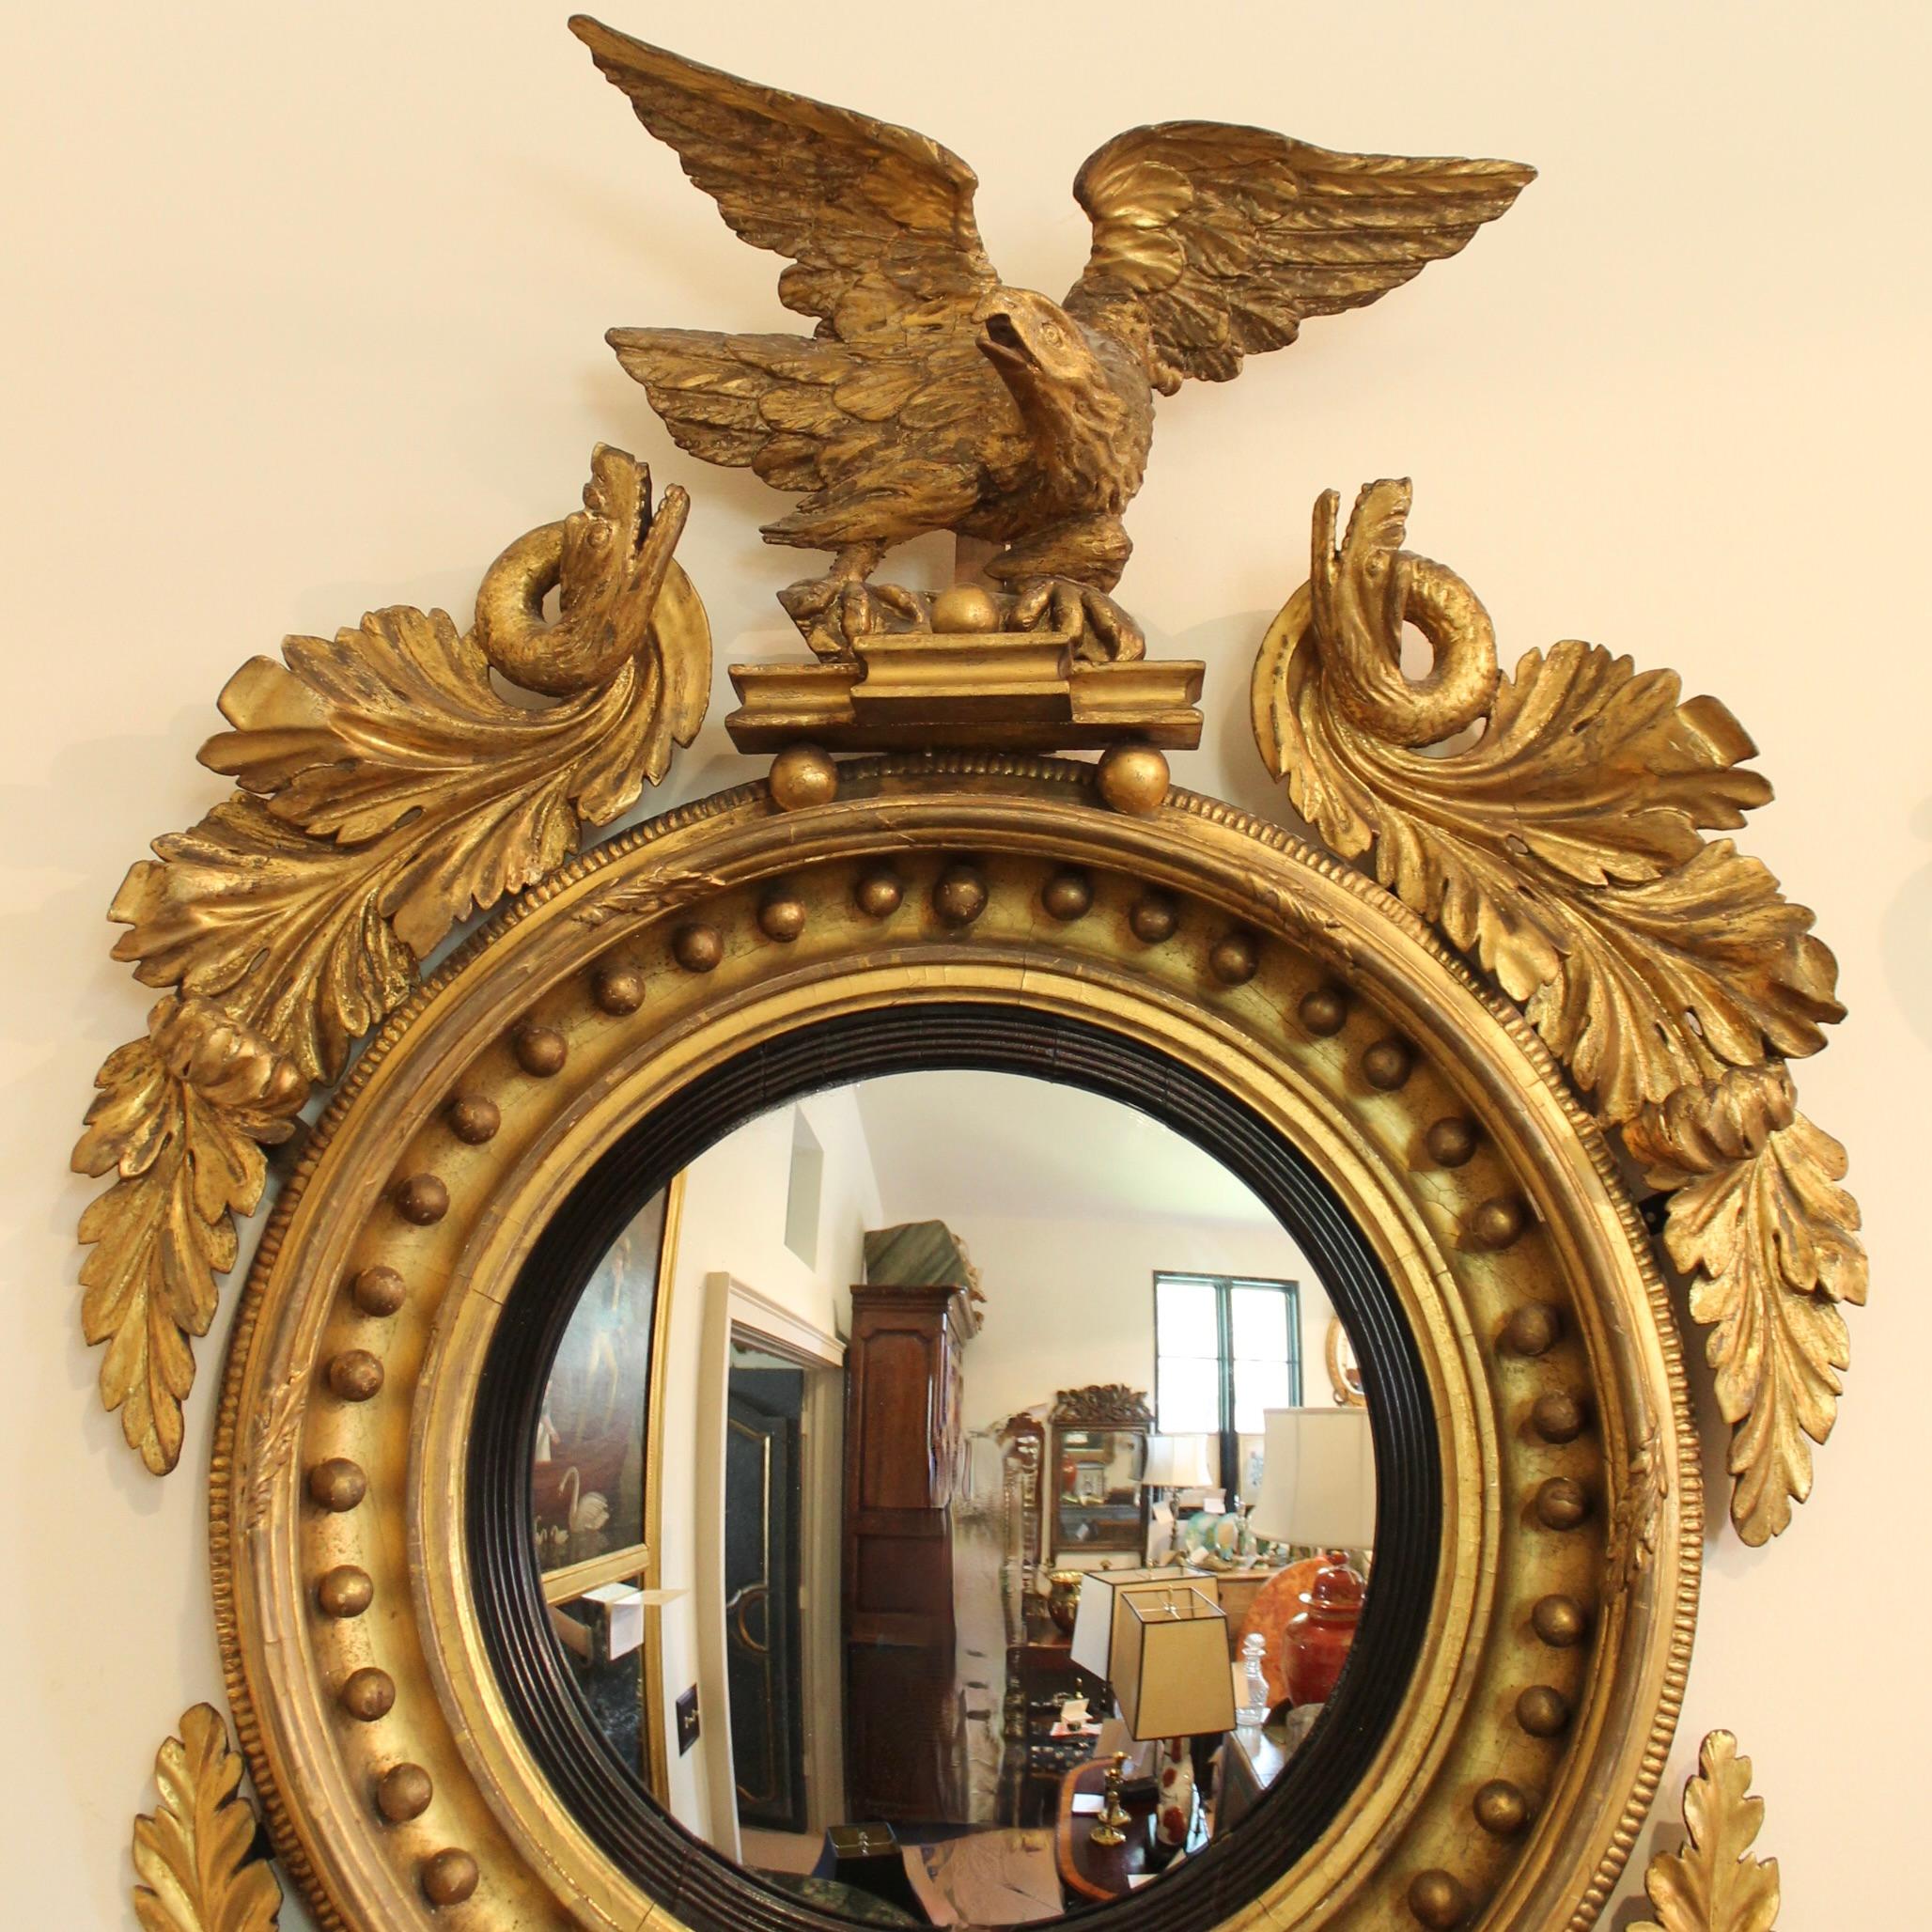 A sizable antique giltwood convex mirror carved in an assured hand with an eagle on top and swirls of carved and gilded acanthus foliage at the sides, the uppermost transforming into fantastical sea serpents. A tautly carved scallop shell